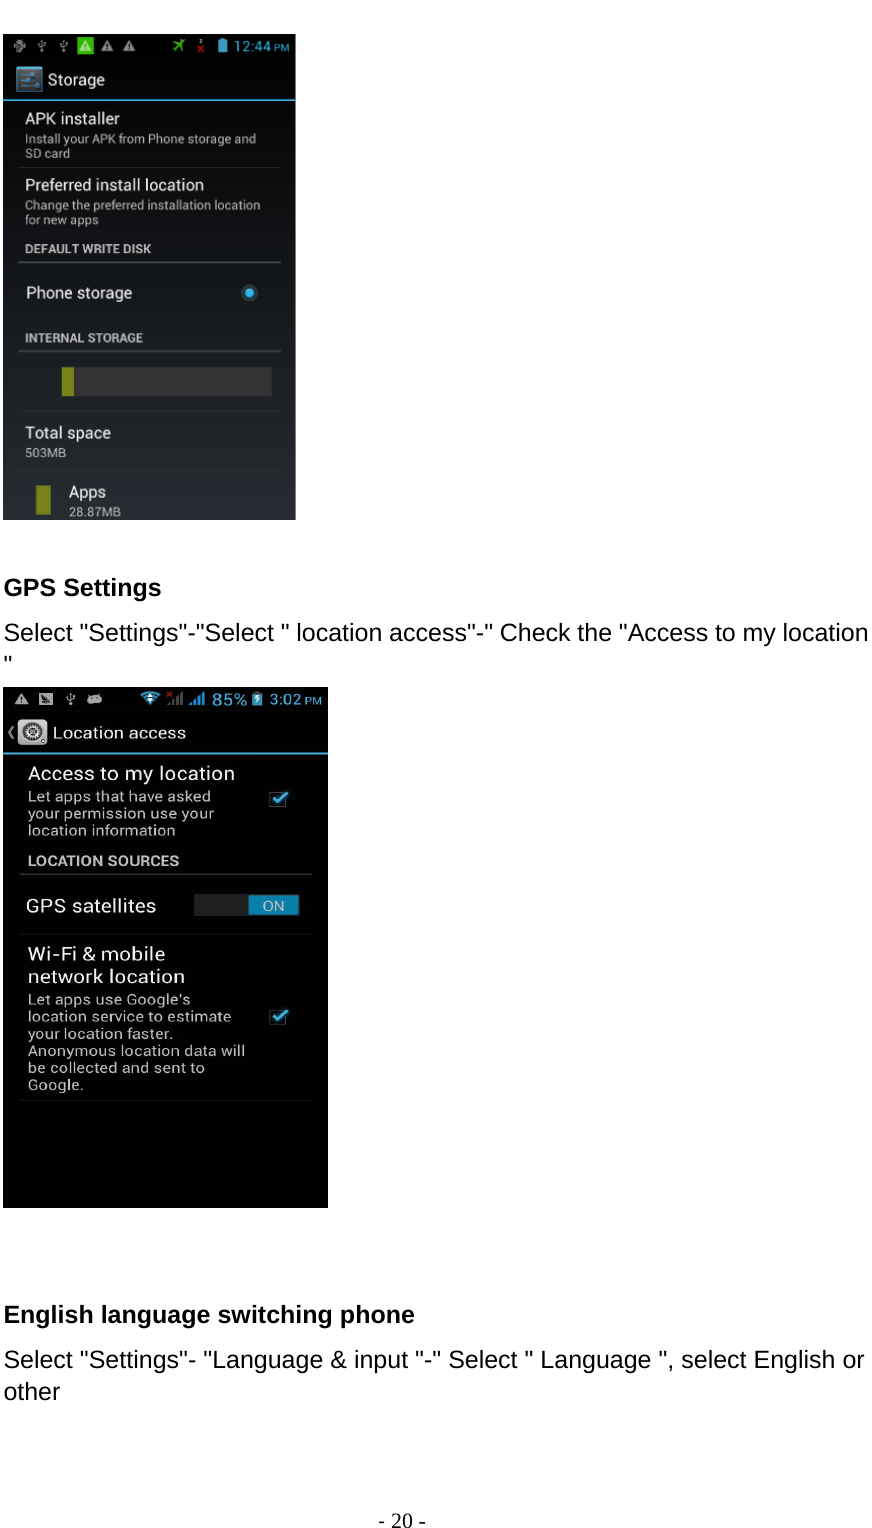                                          ‐ 20 -   GPS Settings Select &quot;Settings&quot;-&quot;Select &quot; location access&quot;-&quot; Check the &quot;Access to my location &quot;    English language switching phone Select &quot;Settings&quot;- &quot;Language &amp; input &quot;-&quot; Select &quot; Language &quot;, select English or other      